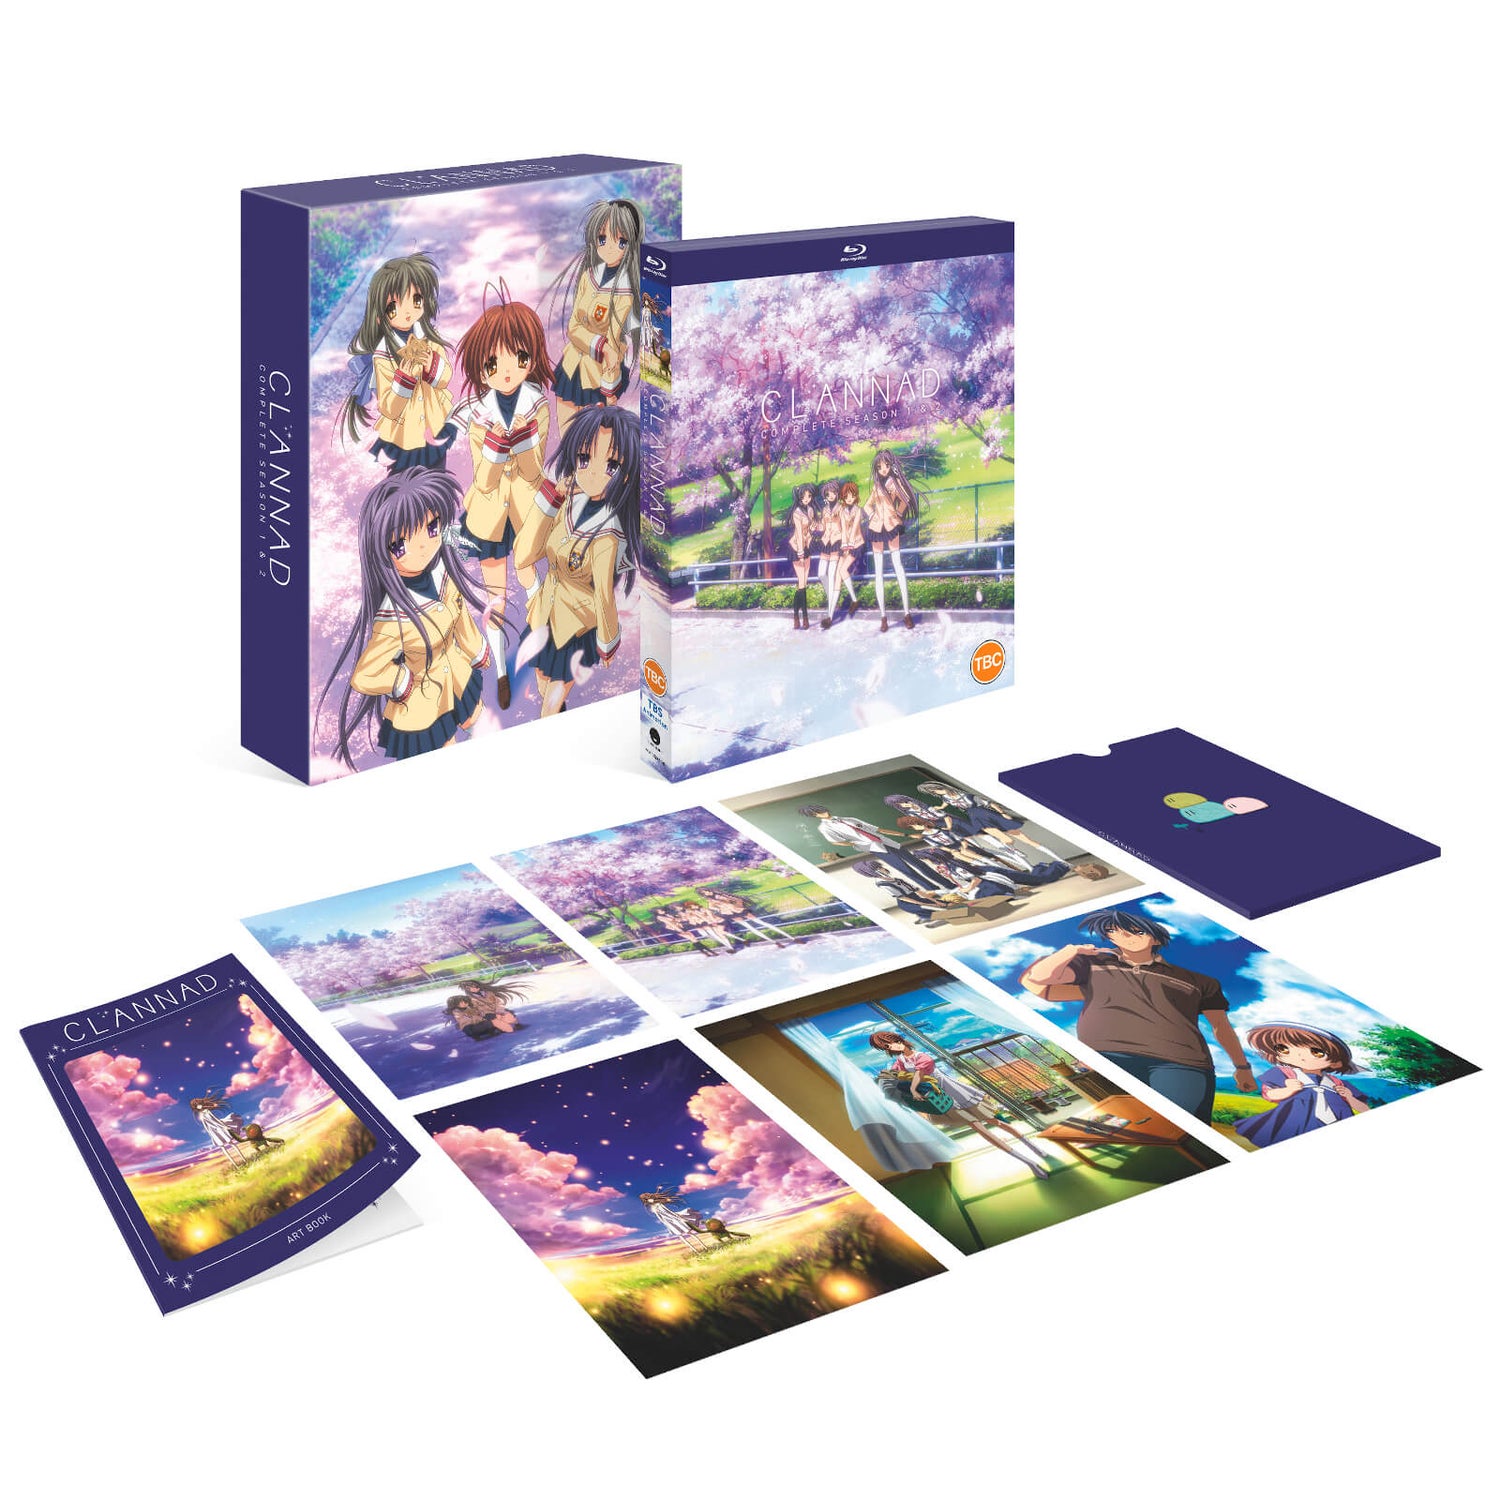 Clannad & Clannad After Story Complete Collection - Limited Edition